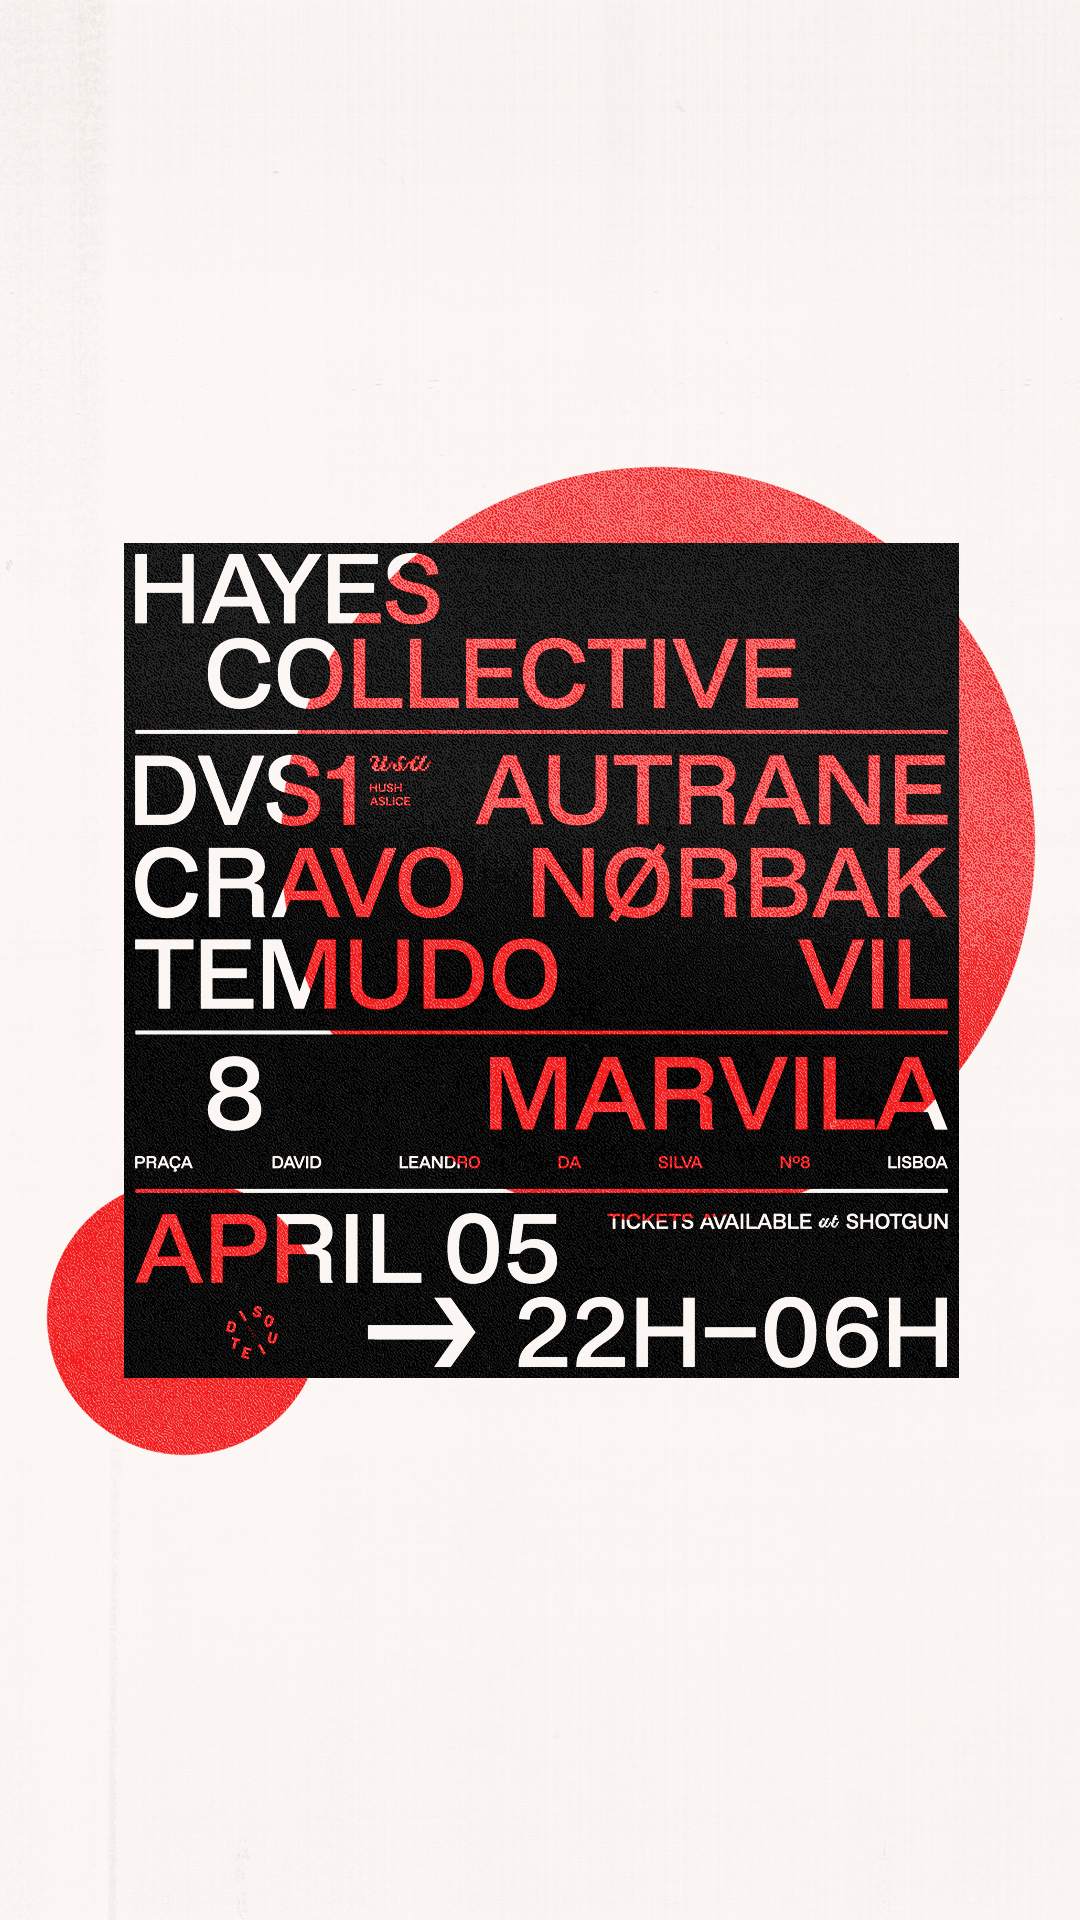 Hayes Collective showcase with DVS1 - フライヤー表